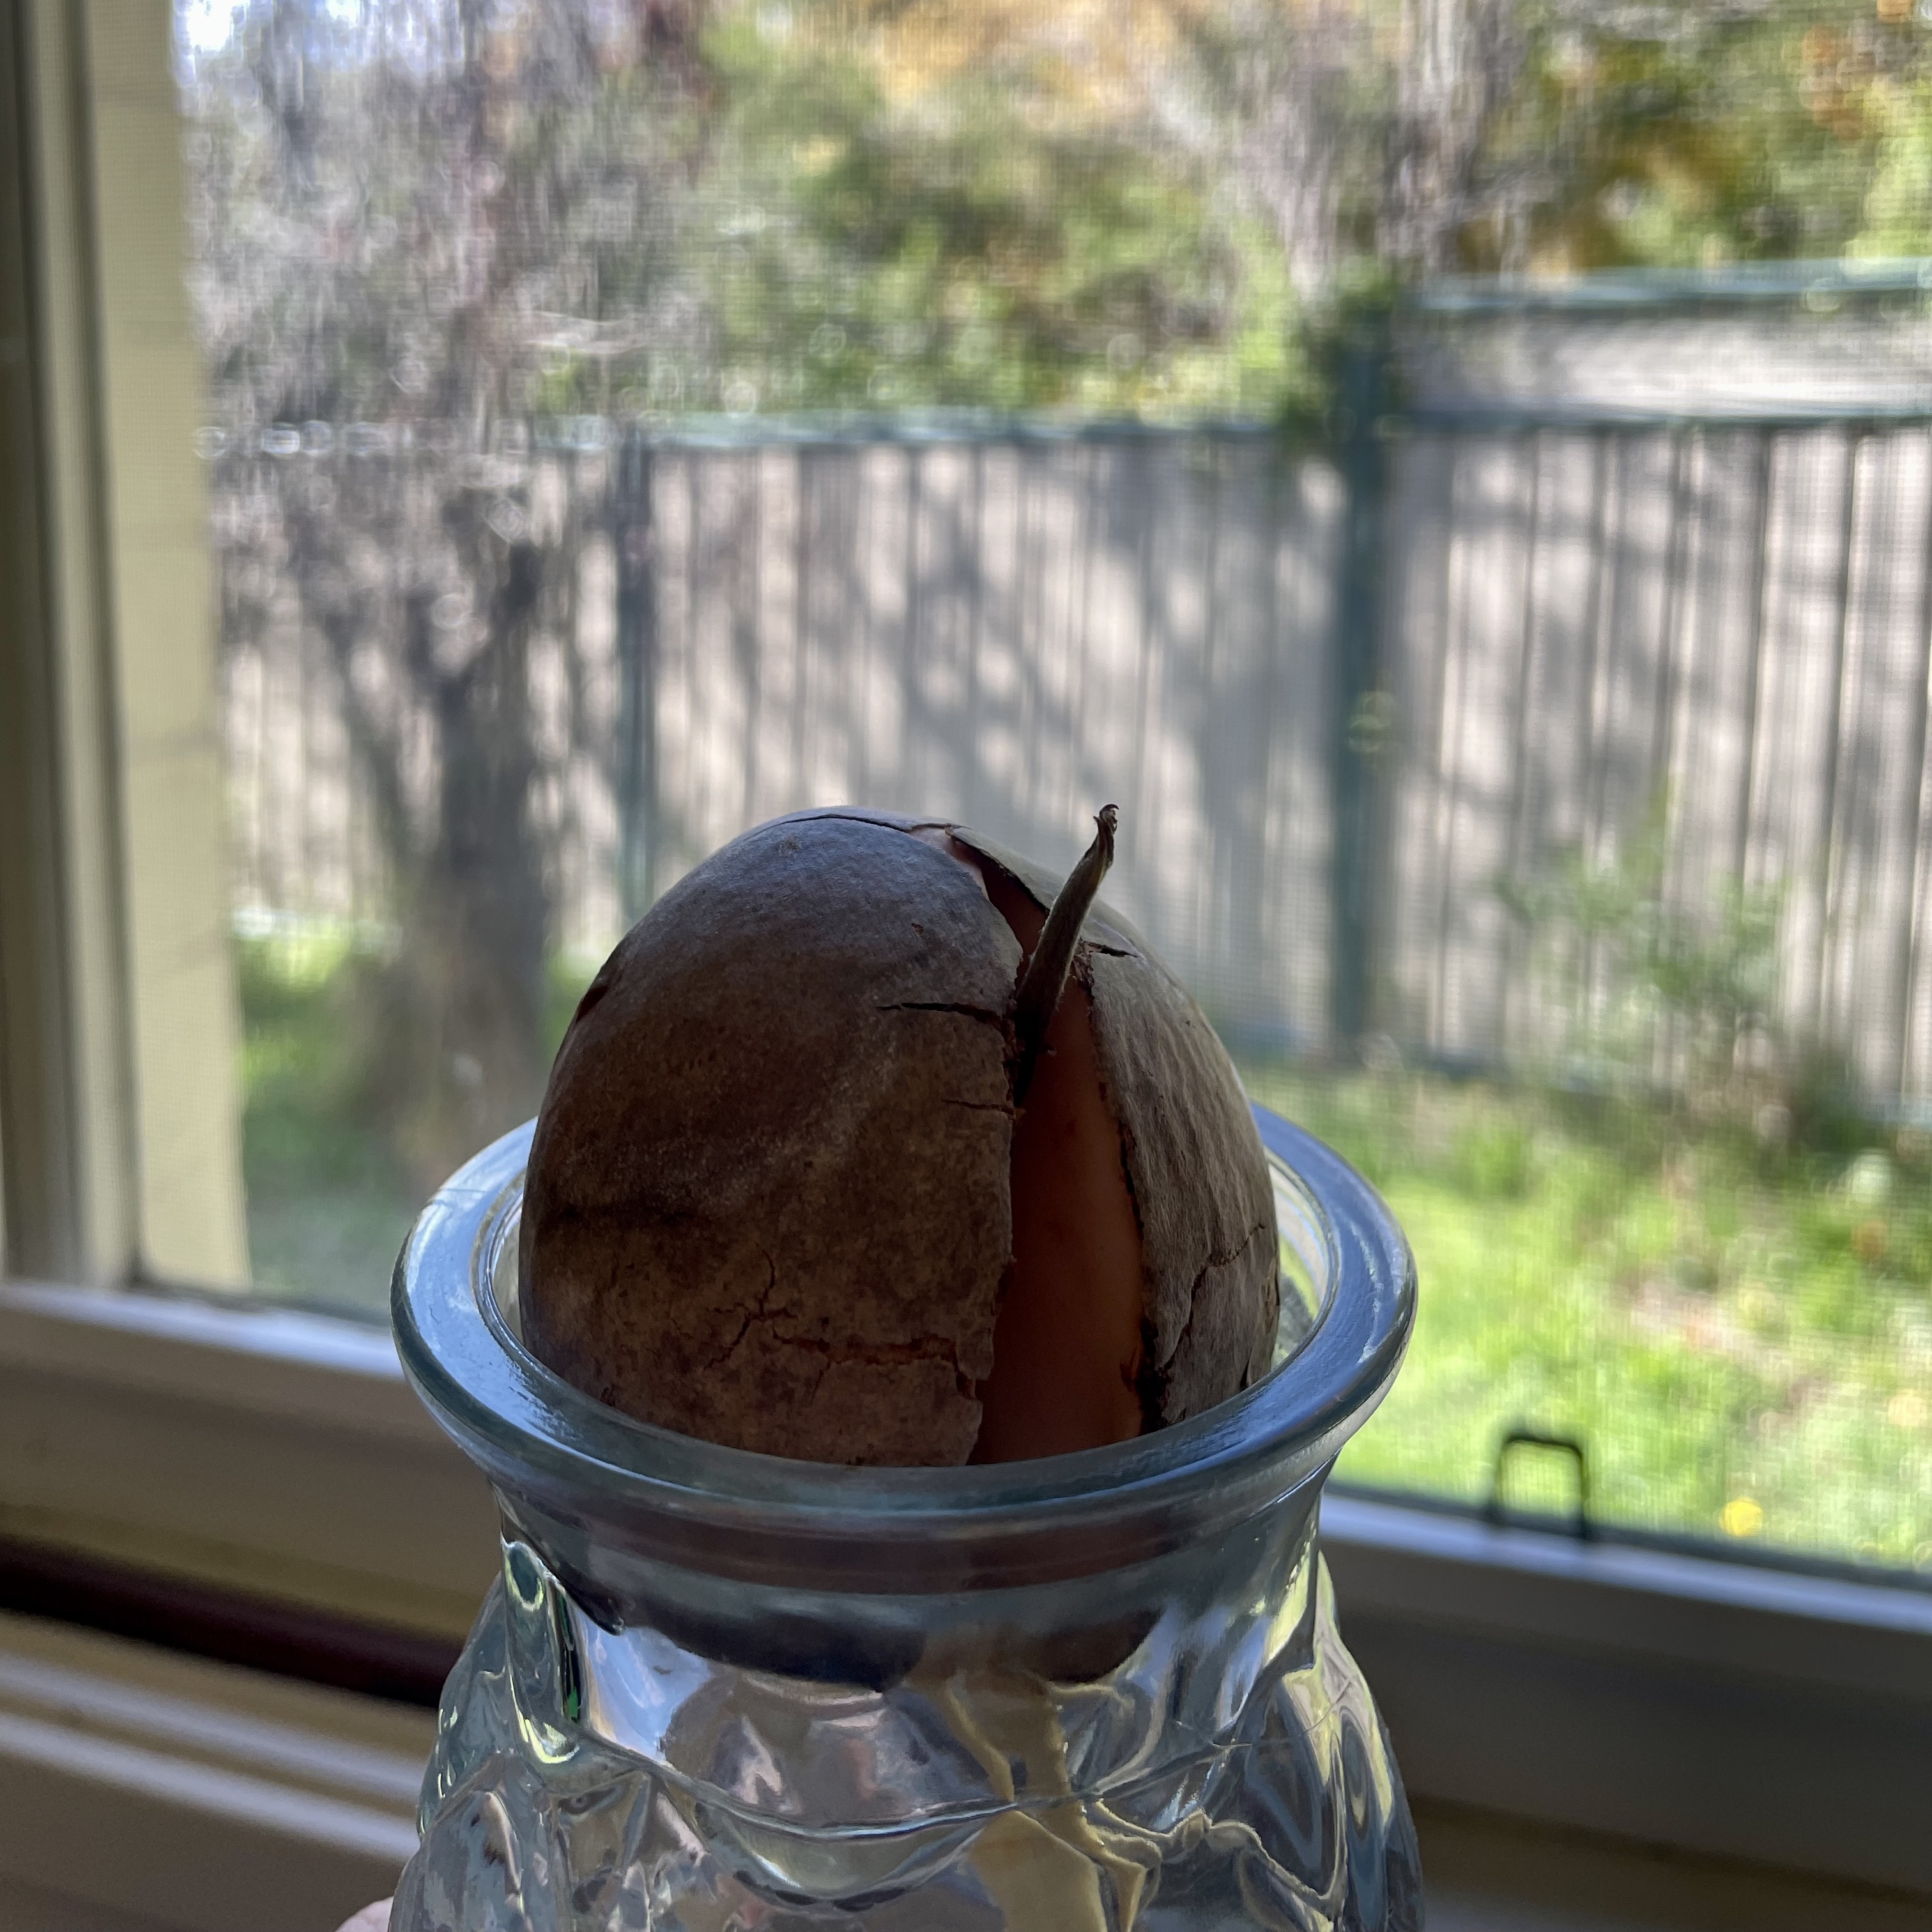 An avocado seed beginning to sprout